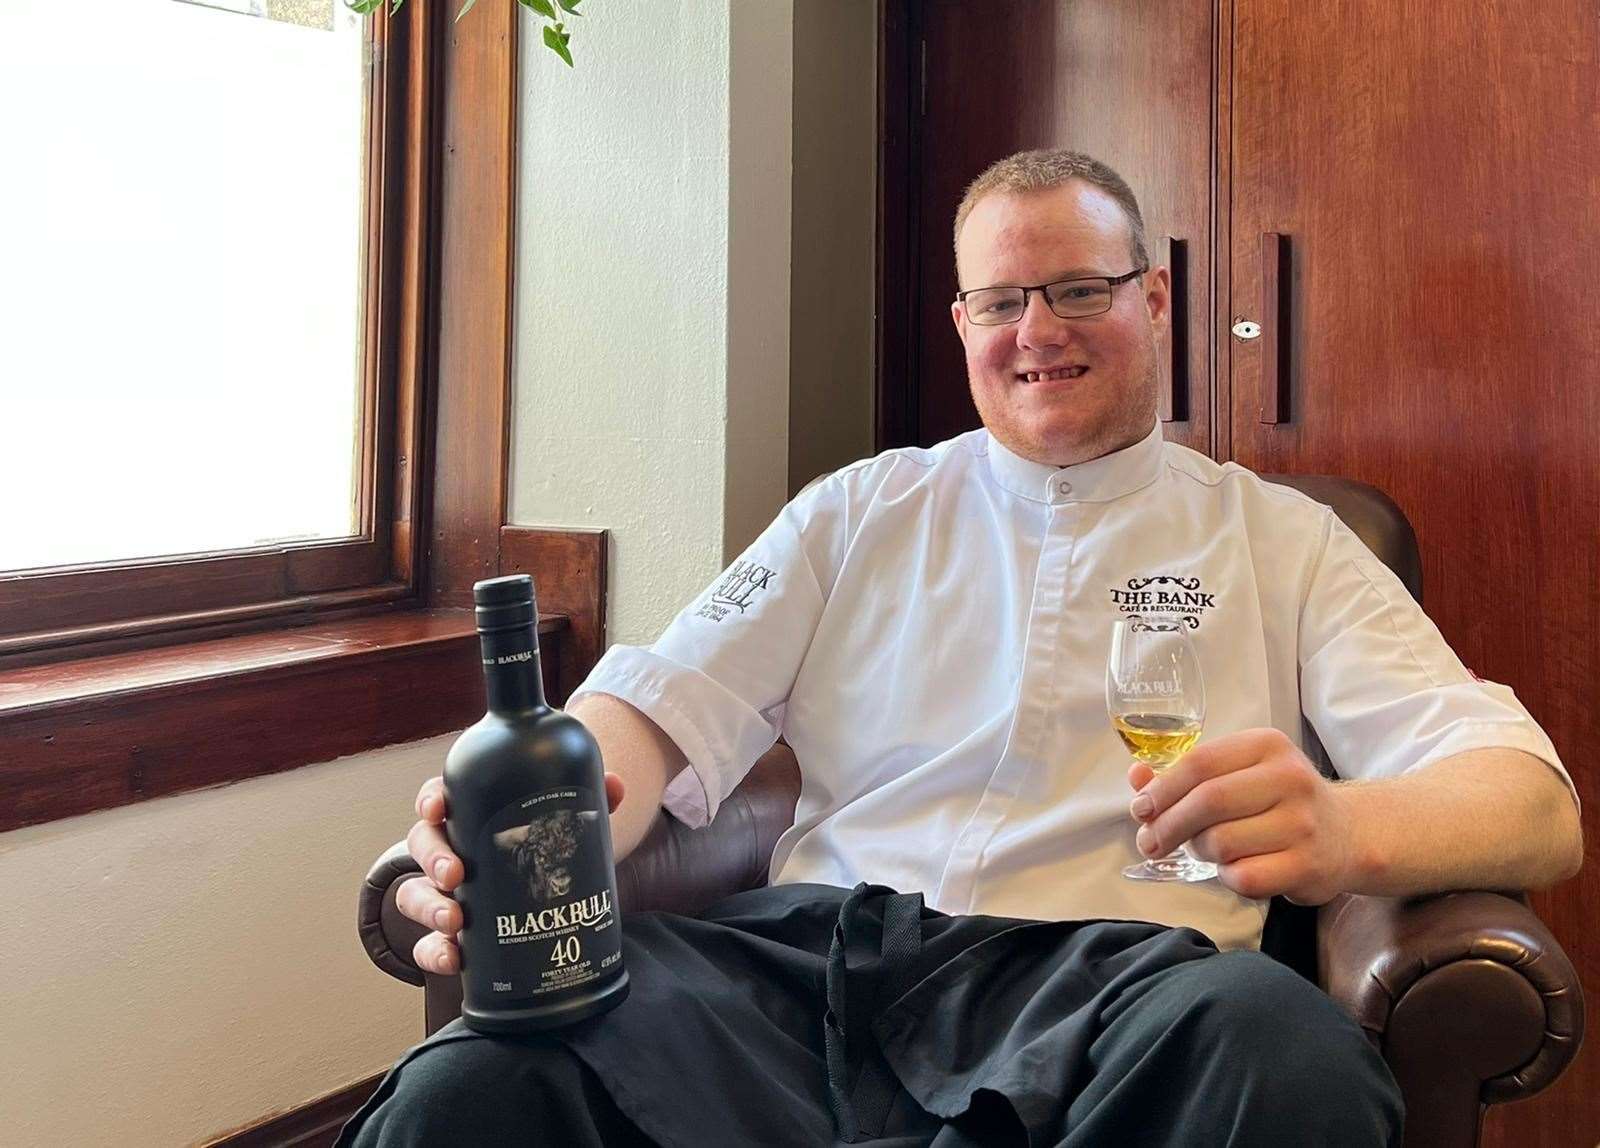 Shaun McWilliam, is back in Huntly as a chef at The Bank where whisky will feature in some of his dishes.